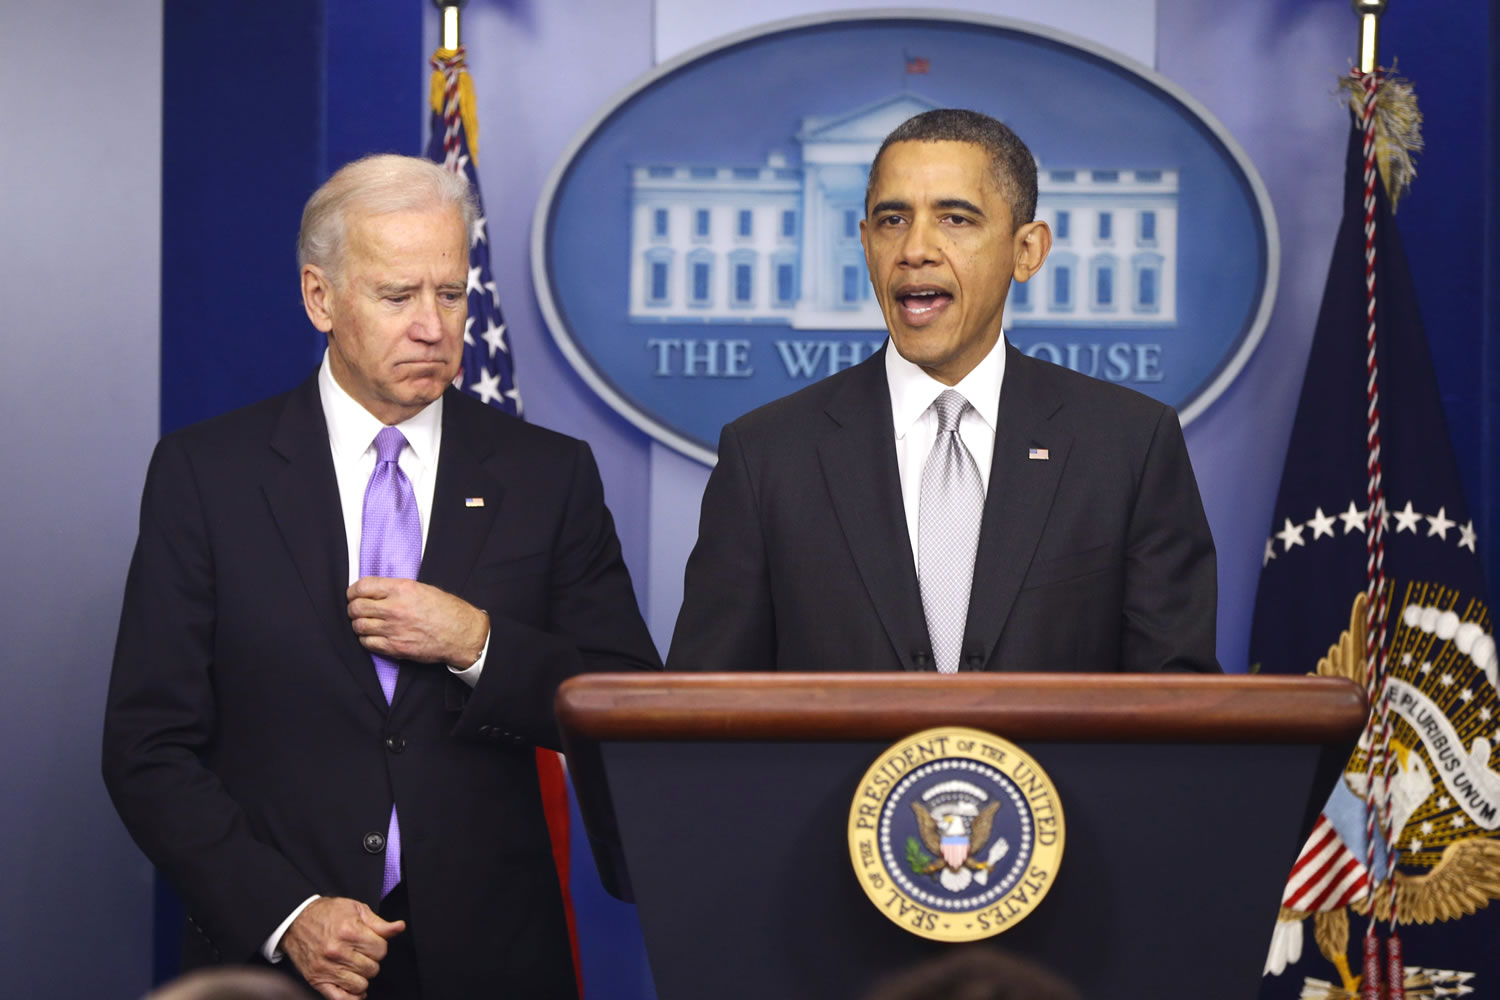 President Barack Obama stands with Vice President Joe Biden as he makes a statement Wednesday in the Brady Press Briefing Room about policies he will pursue following the Newtown, Conn., school shootings.